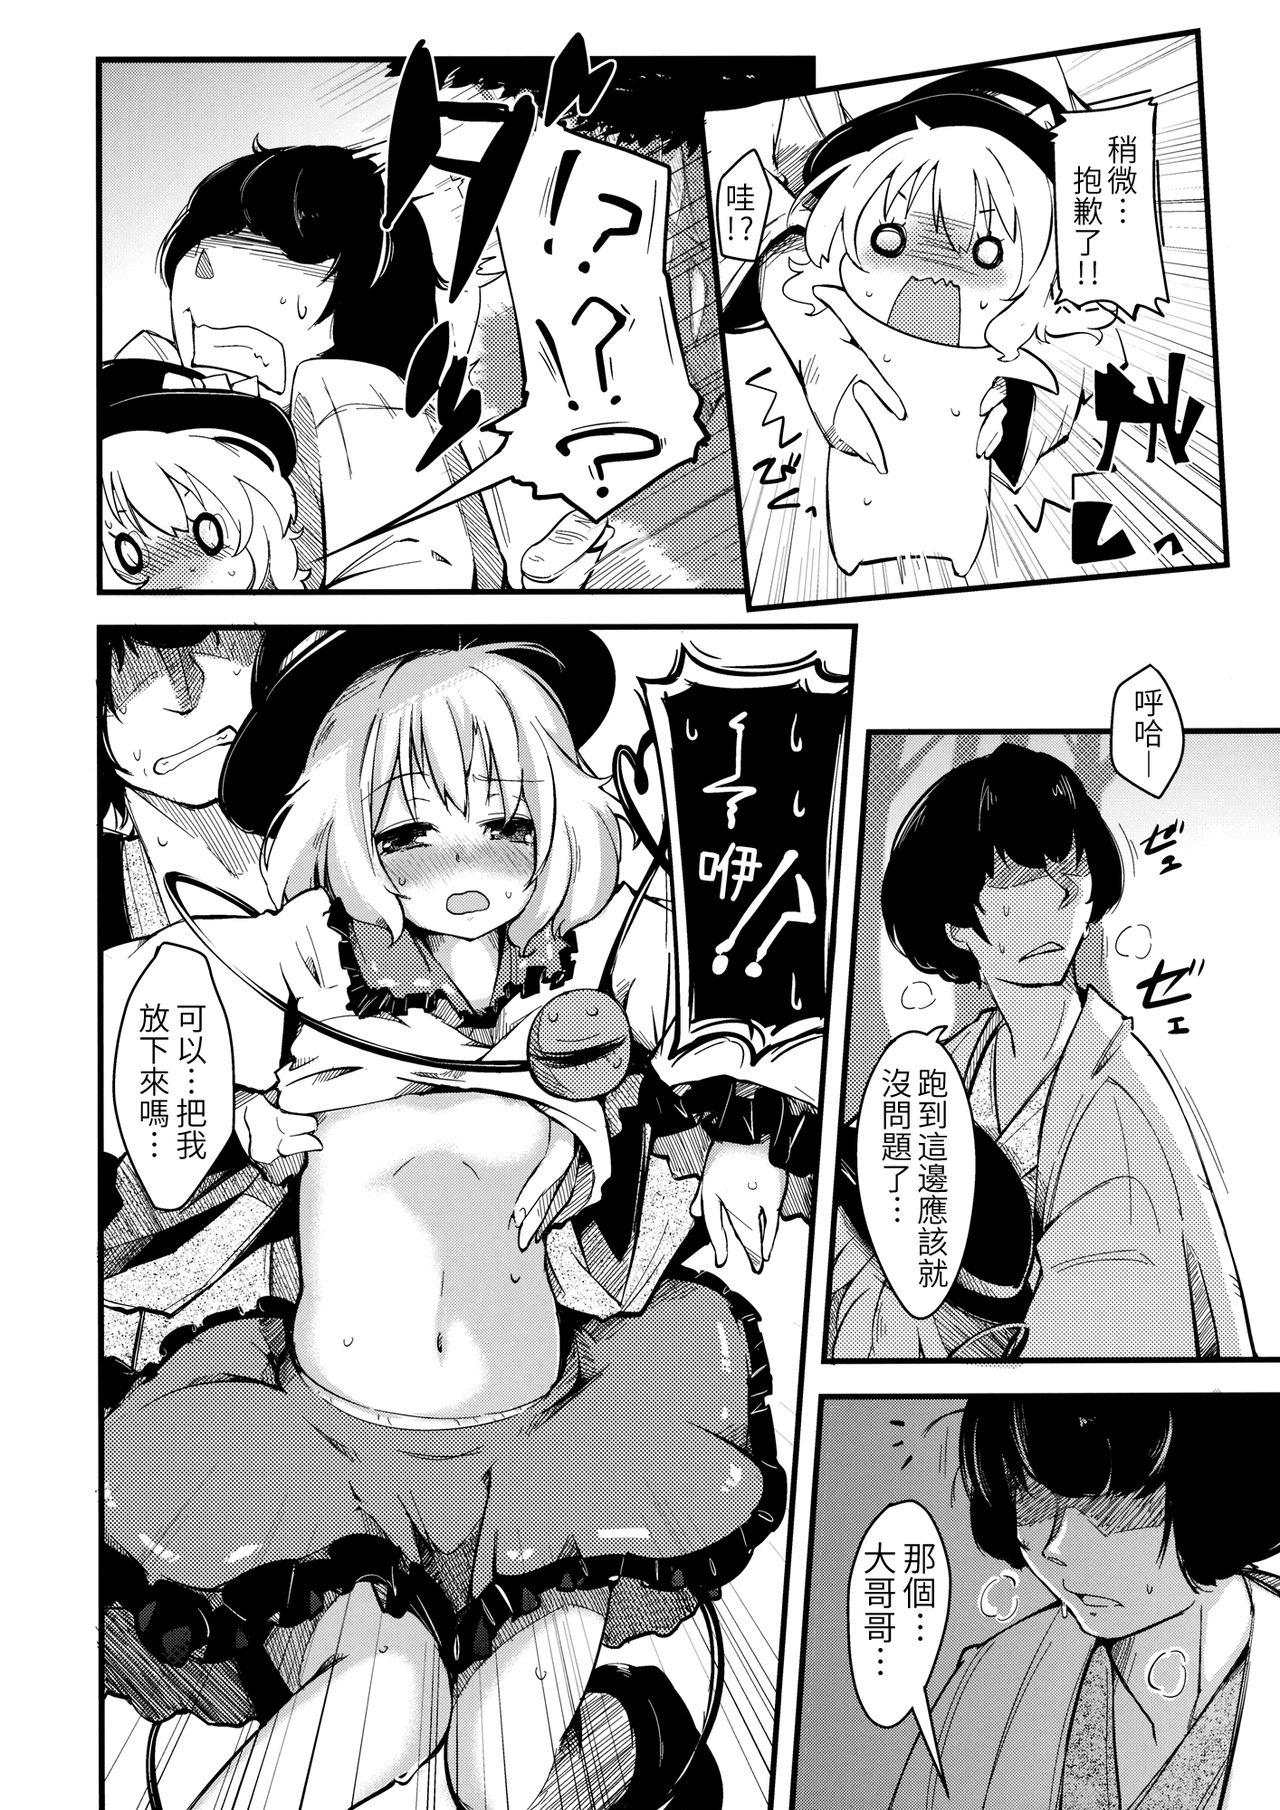 Nurumassage subconscious girl - Touhou project Lover - Page 8